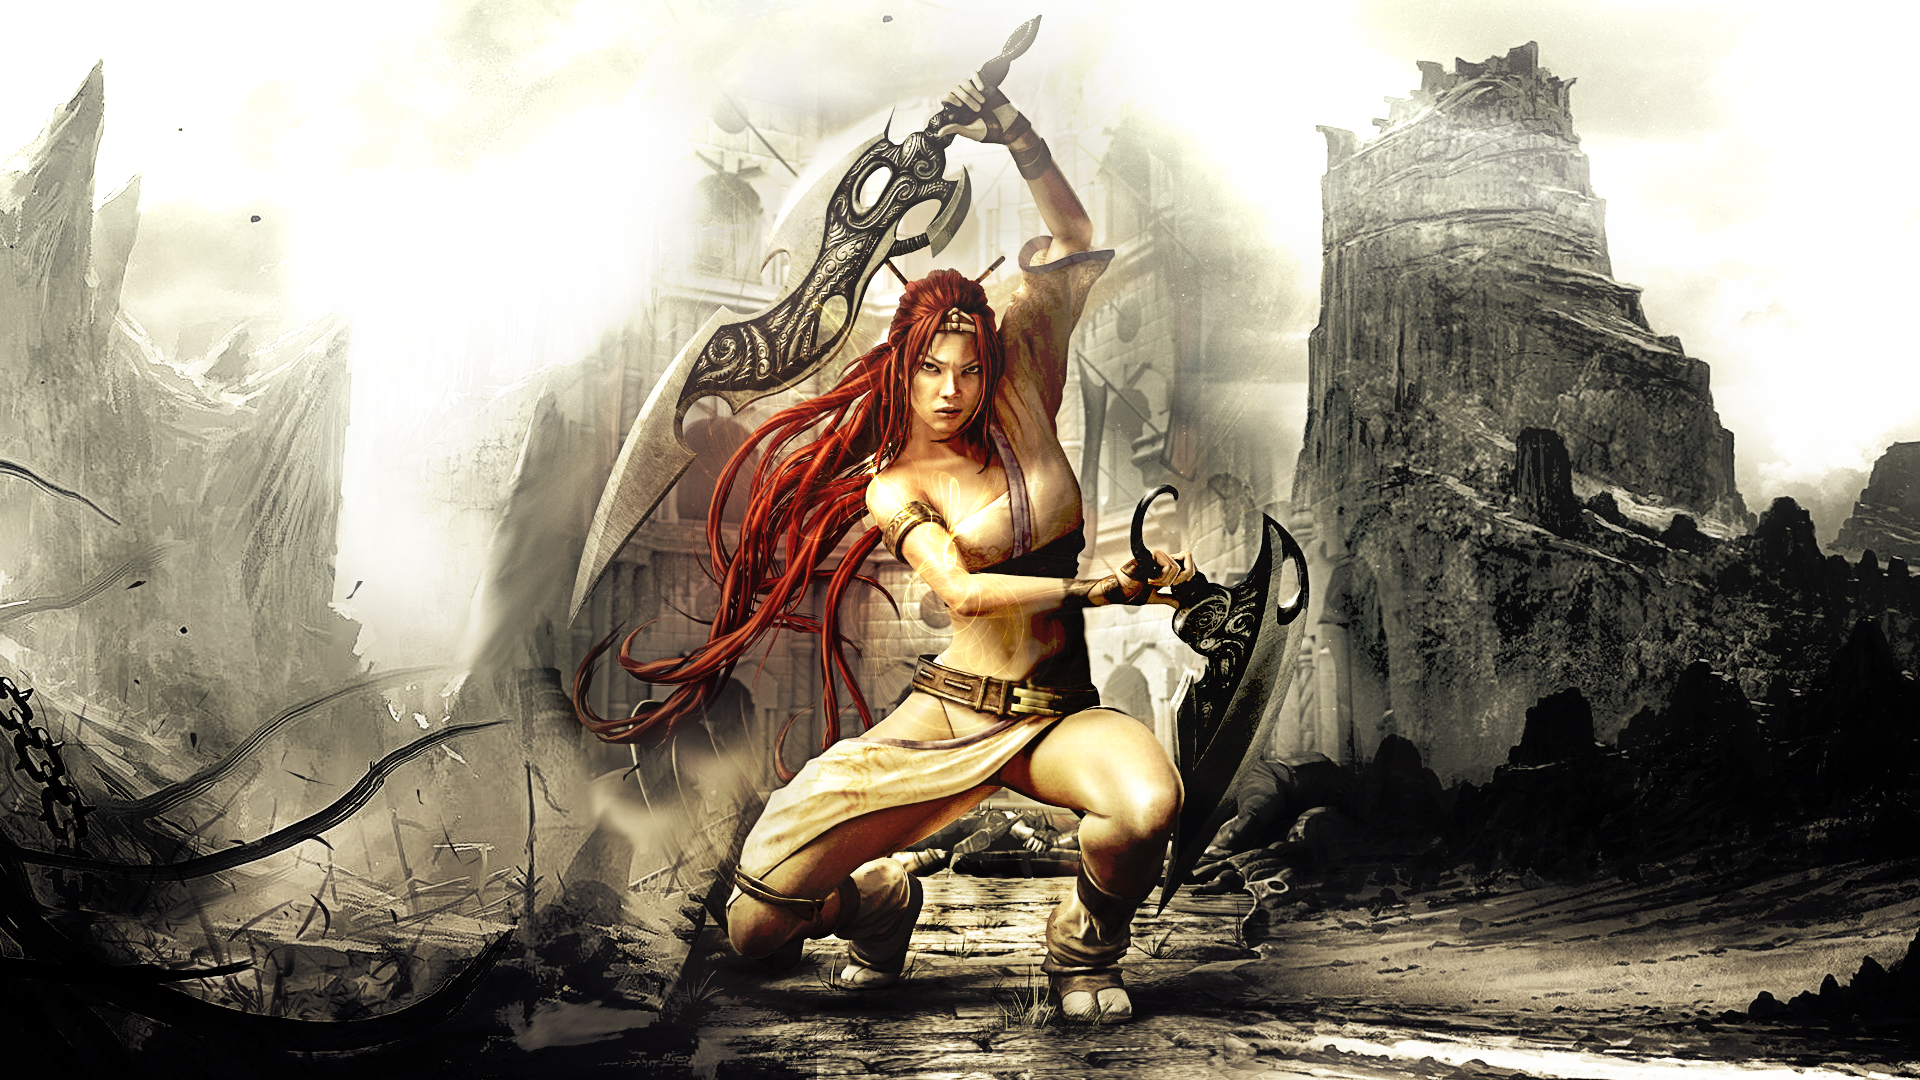 Video Game Heavenly Sword HD Wallpaper | Background Image